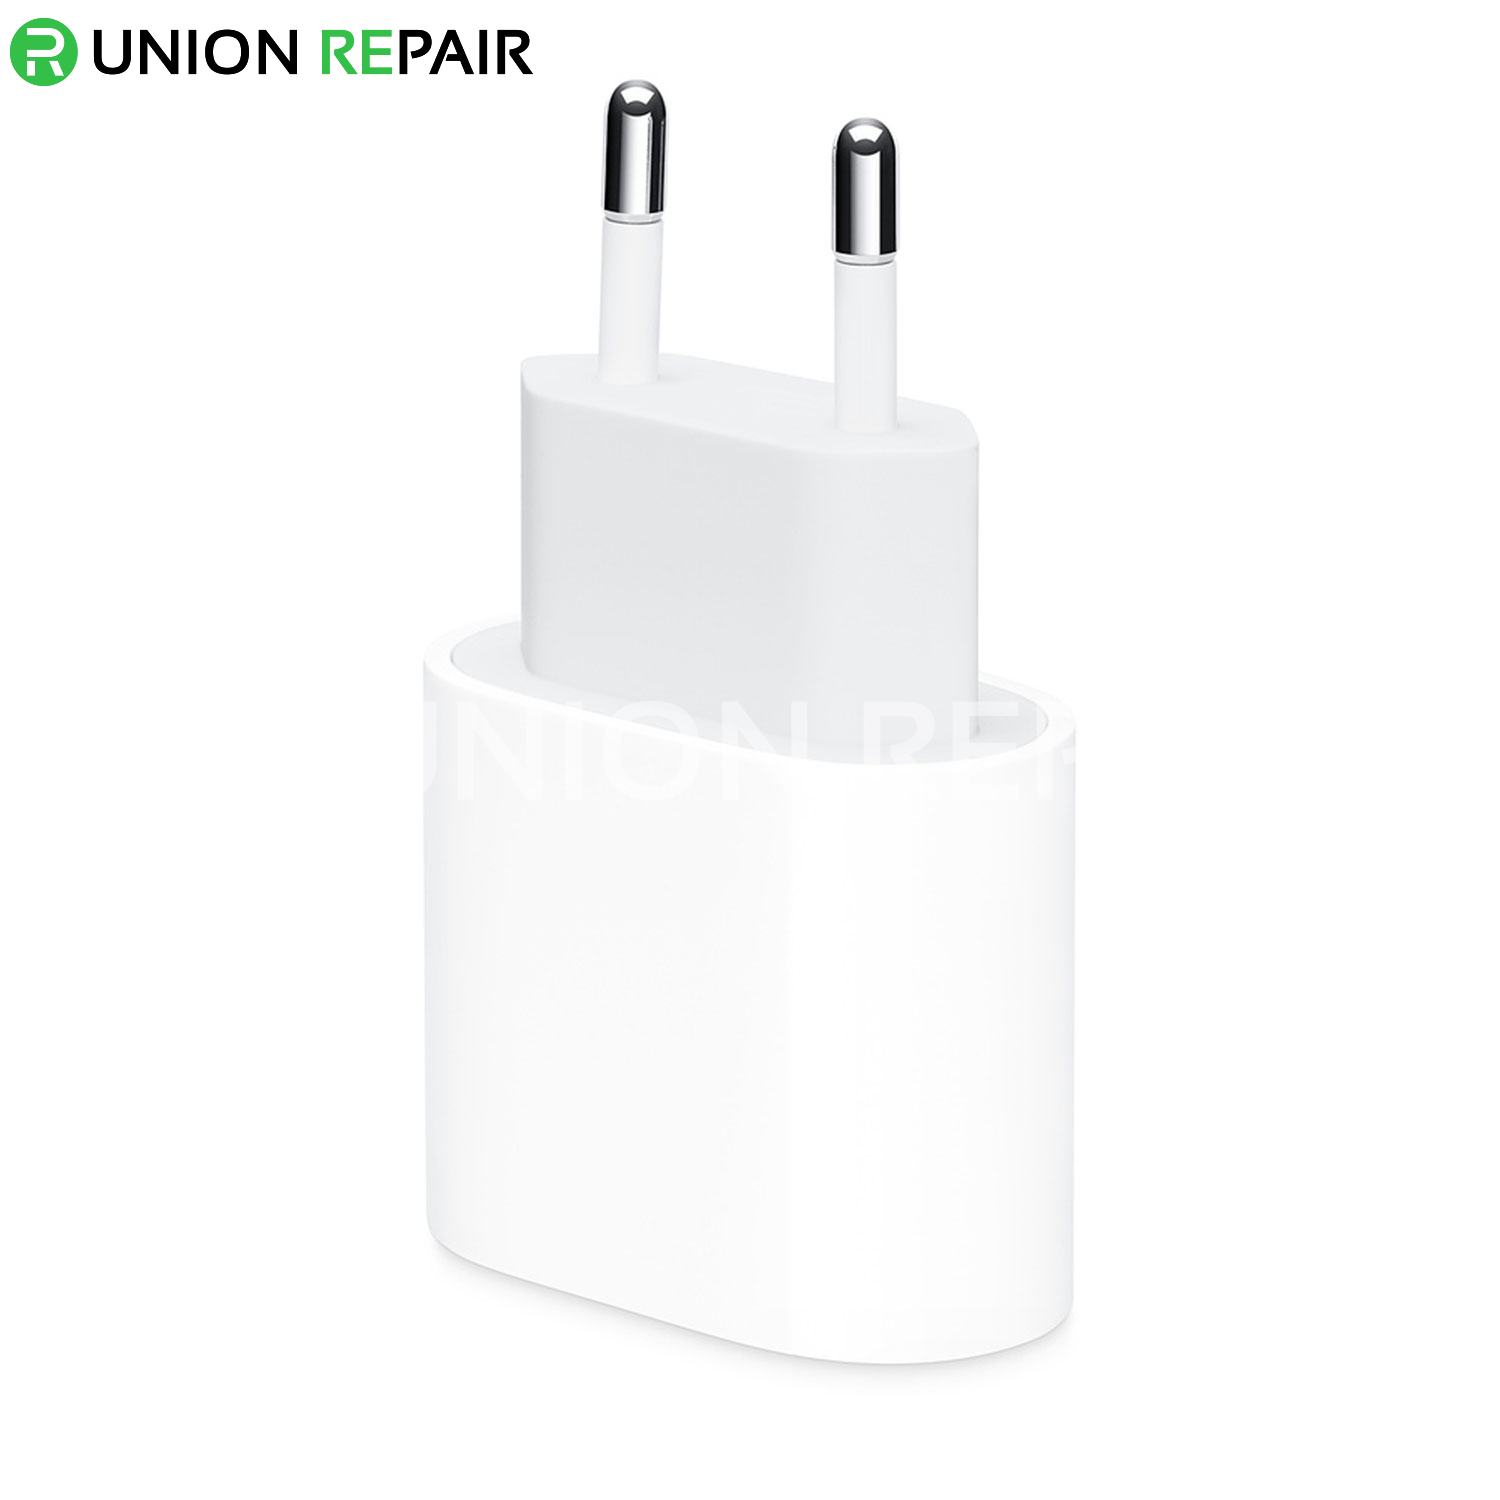  20W USB-C Power Adapter for iPhone - EU Version, fig. 1 